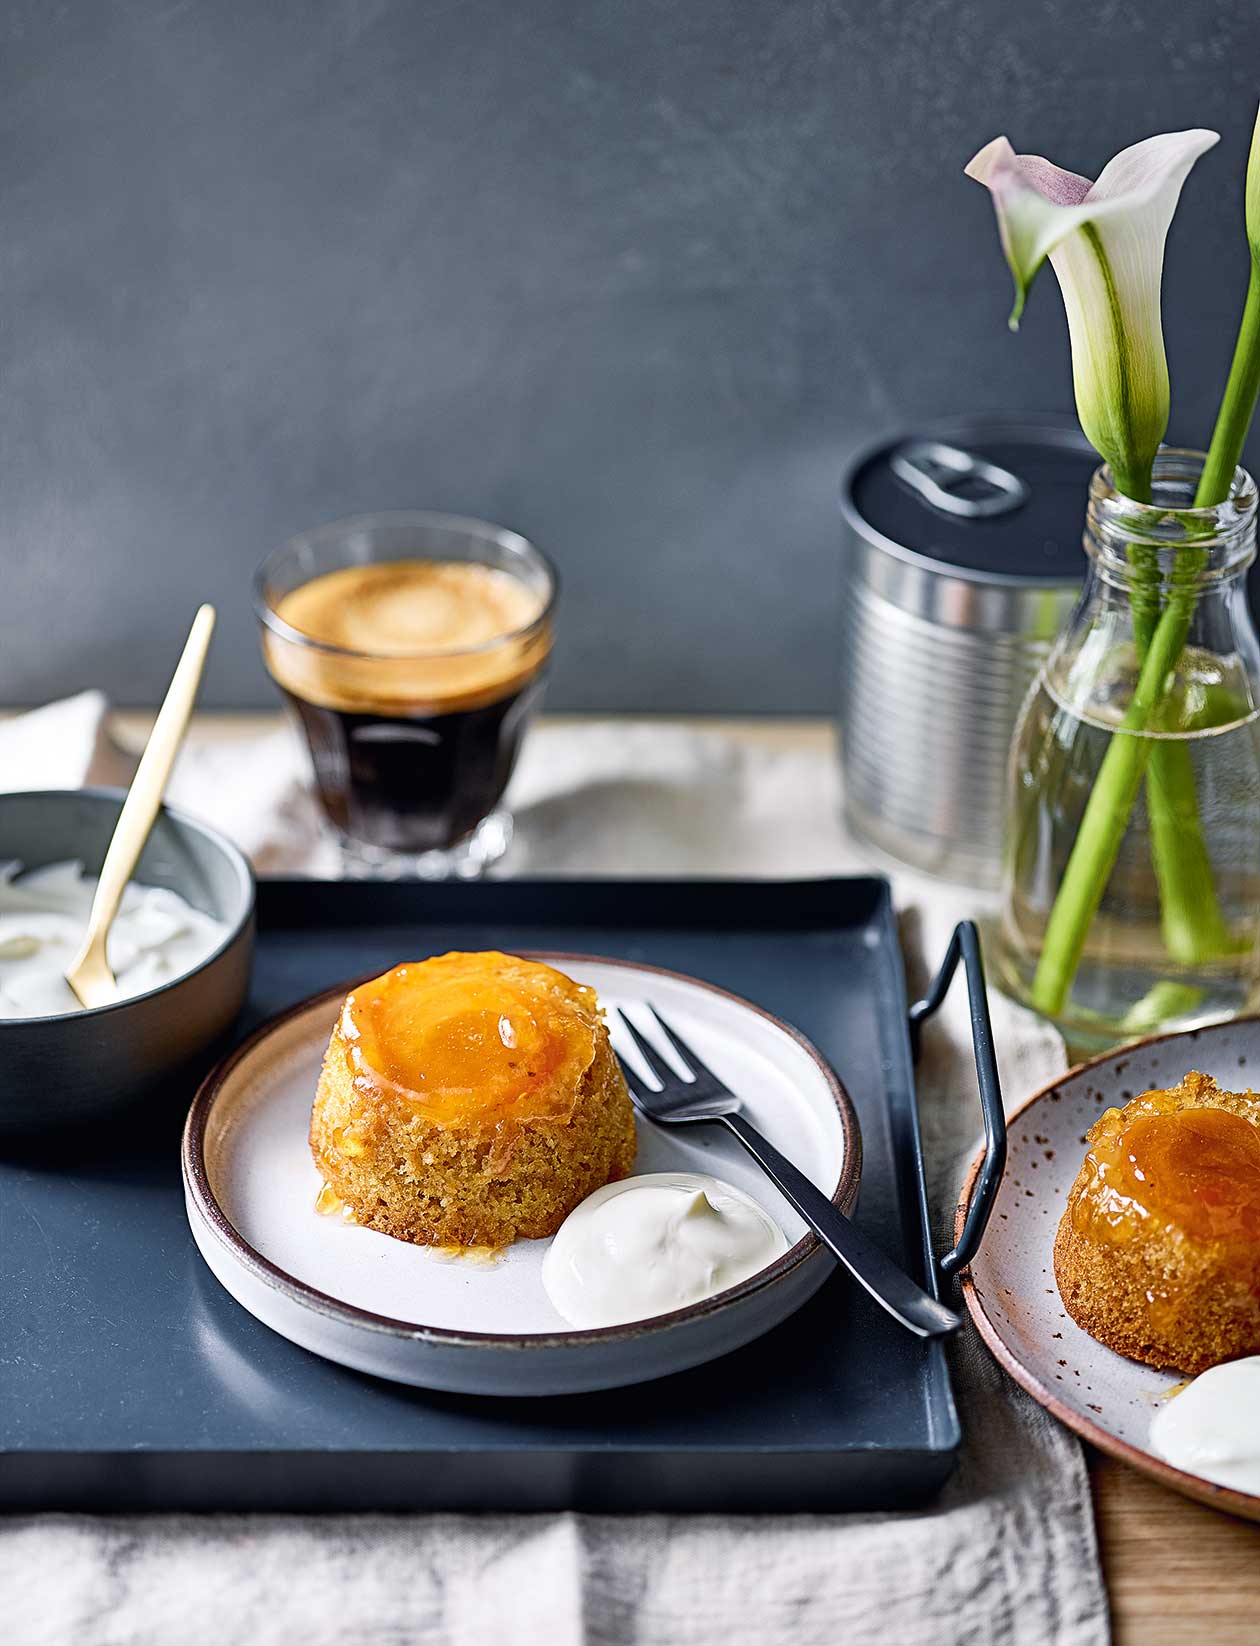 Steamed Apricot And Almond Pudding | The Proof of the Pudding